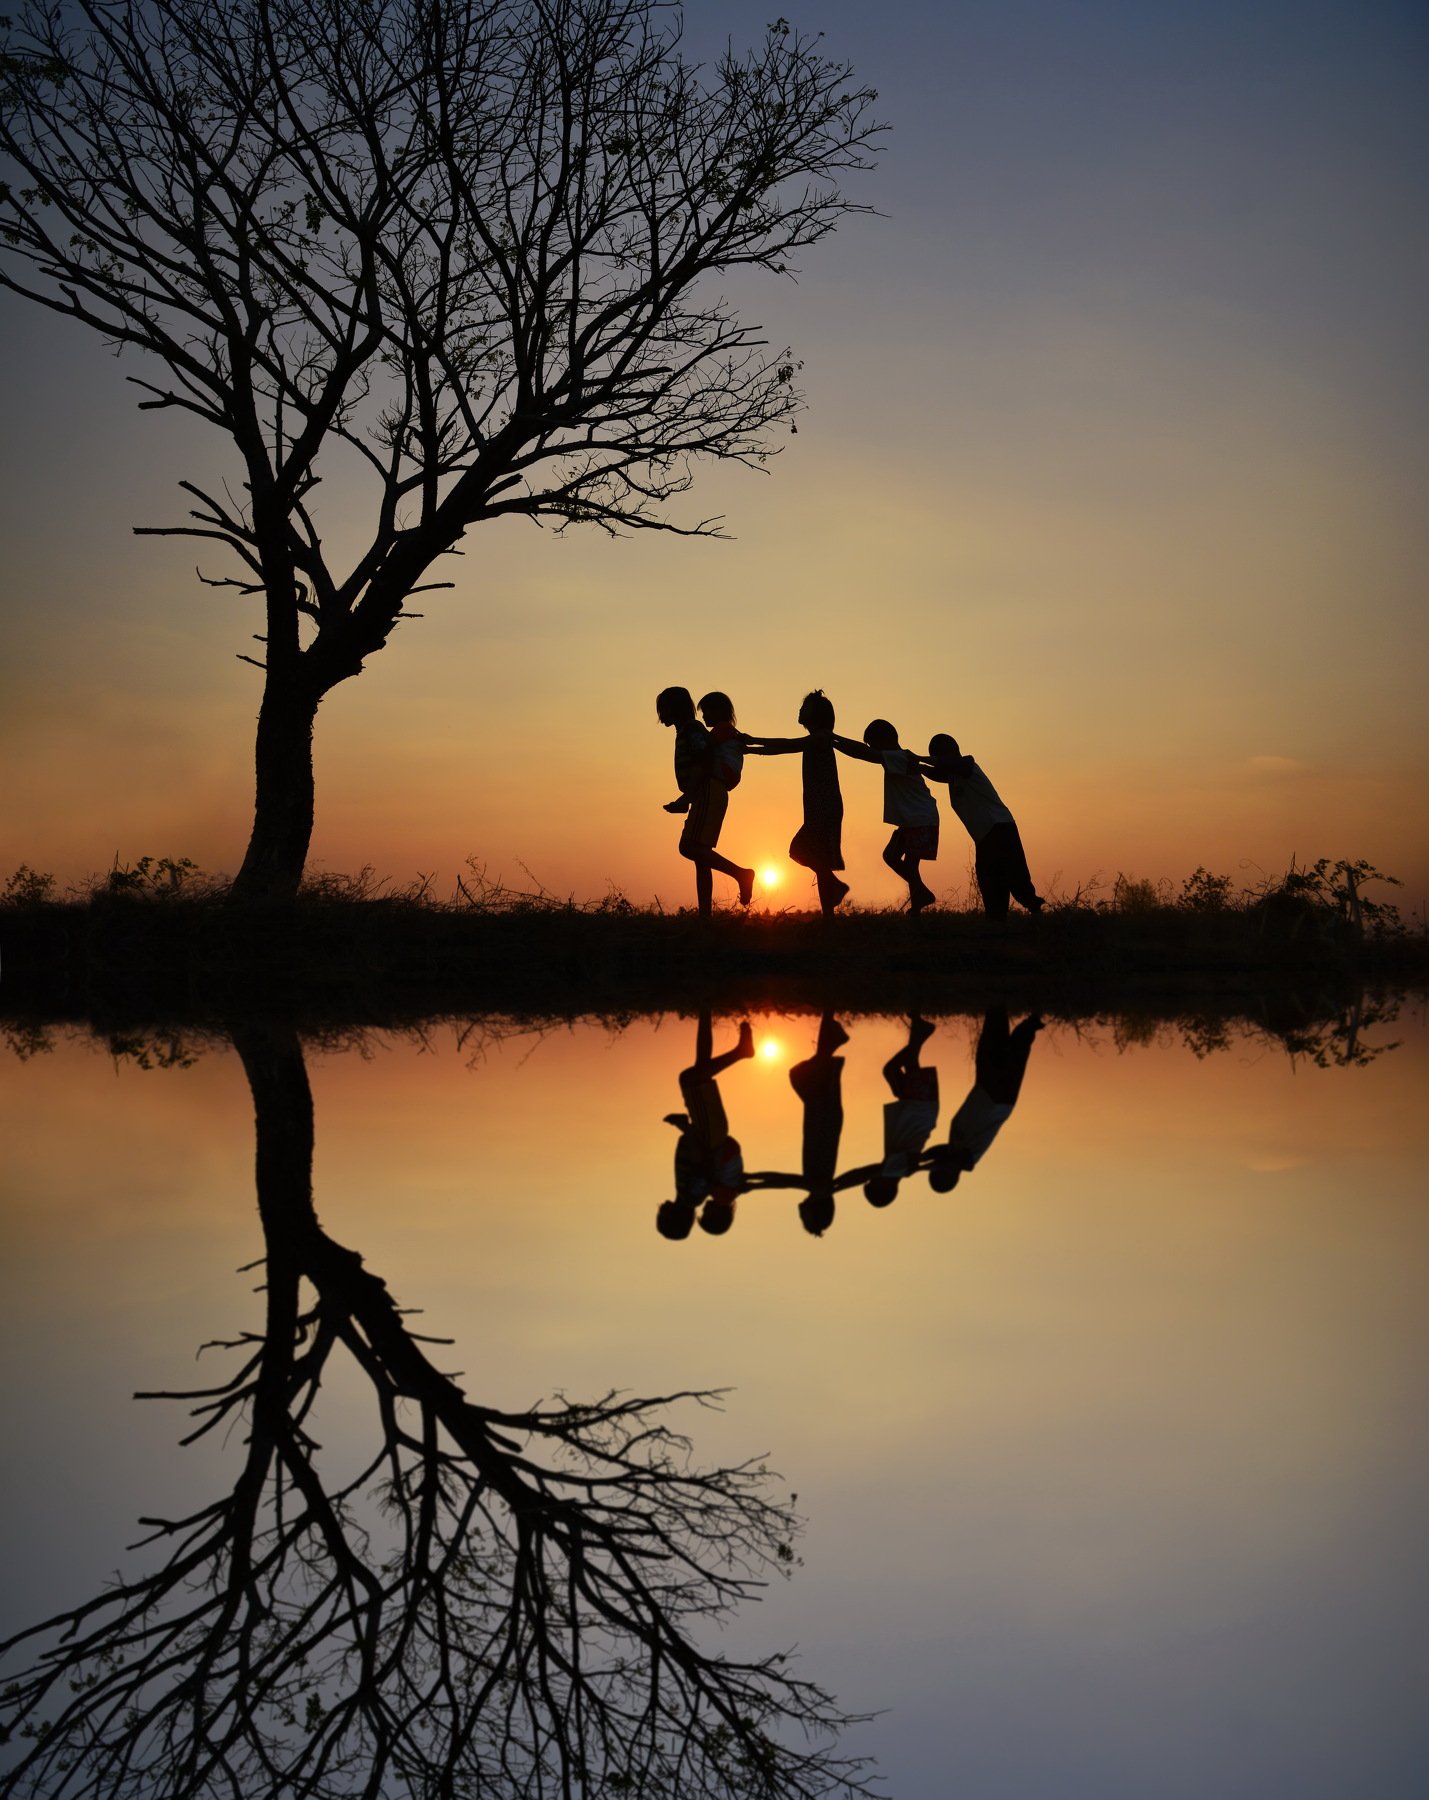 Child, Silhouette, Childhood, People, Pond, Walking, Sky, Sunset, Thailand, Bare Tree, Boys, Carefree, Children Only, Color Image, Elementary Age, Five People, Girls, Grass, Holding, In A Row, On The Move, Outdoors, Photography, Reflection, Sun, Togethern, sarawut intarob